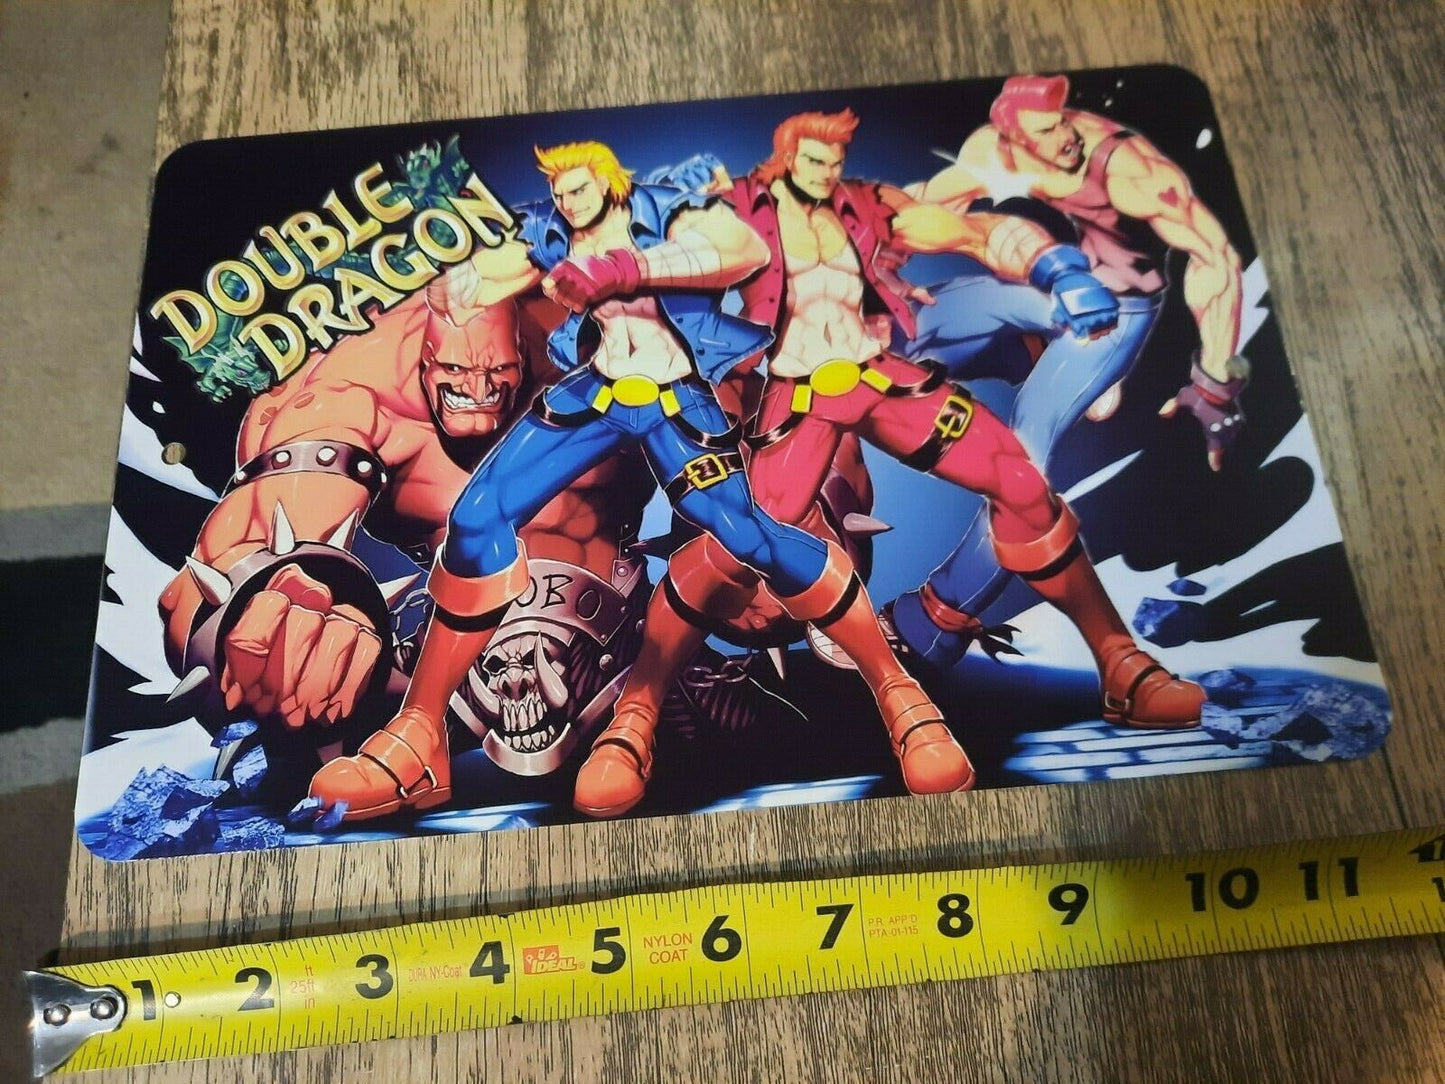 Double Dragon Video Game 8x12 Metal Wall Sign Arcade Classic